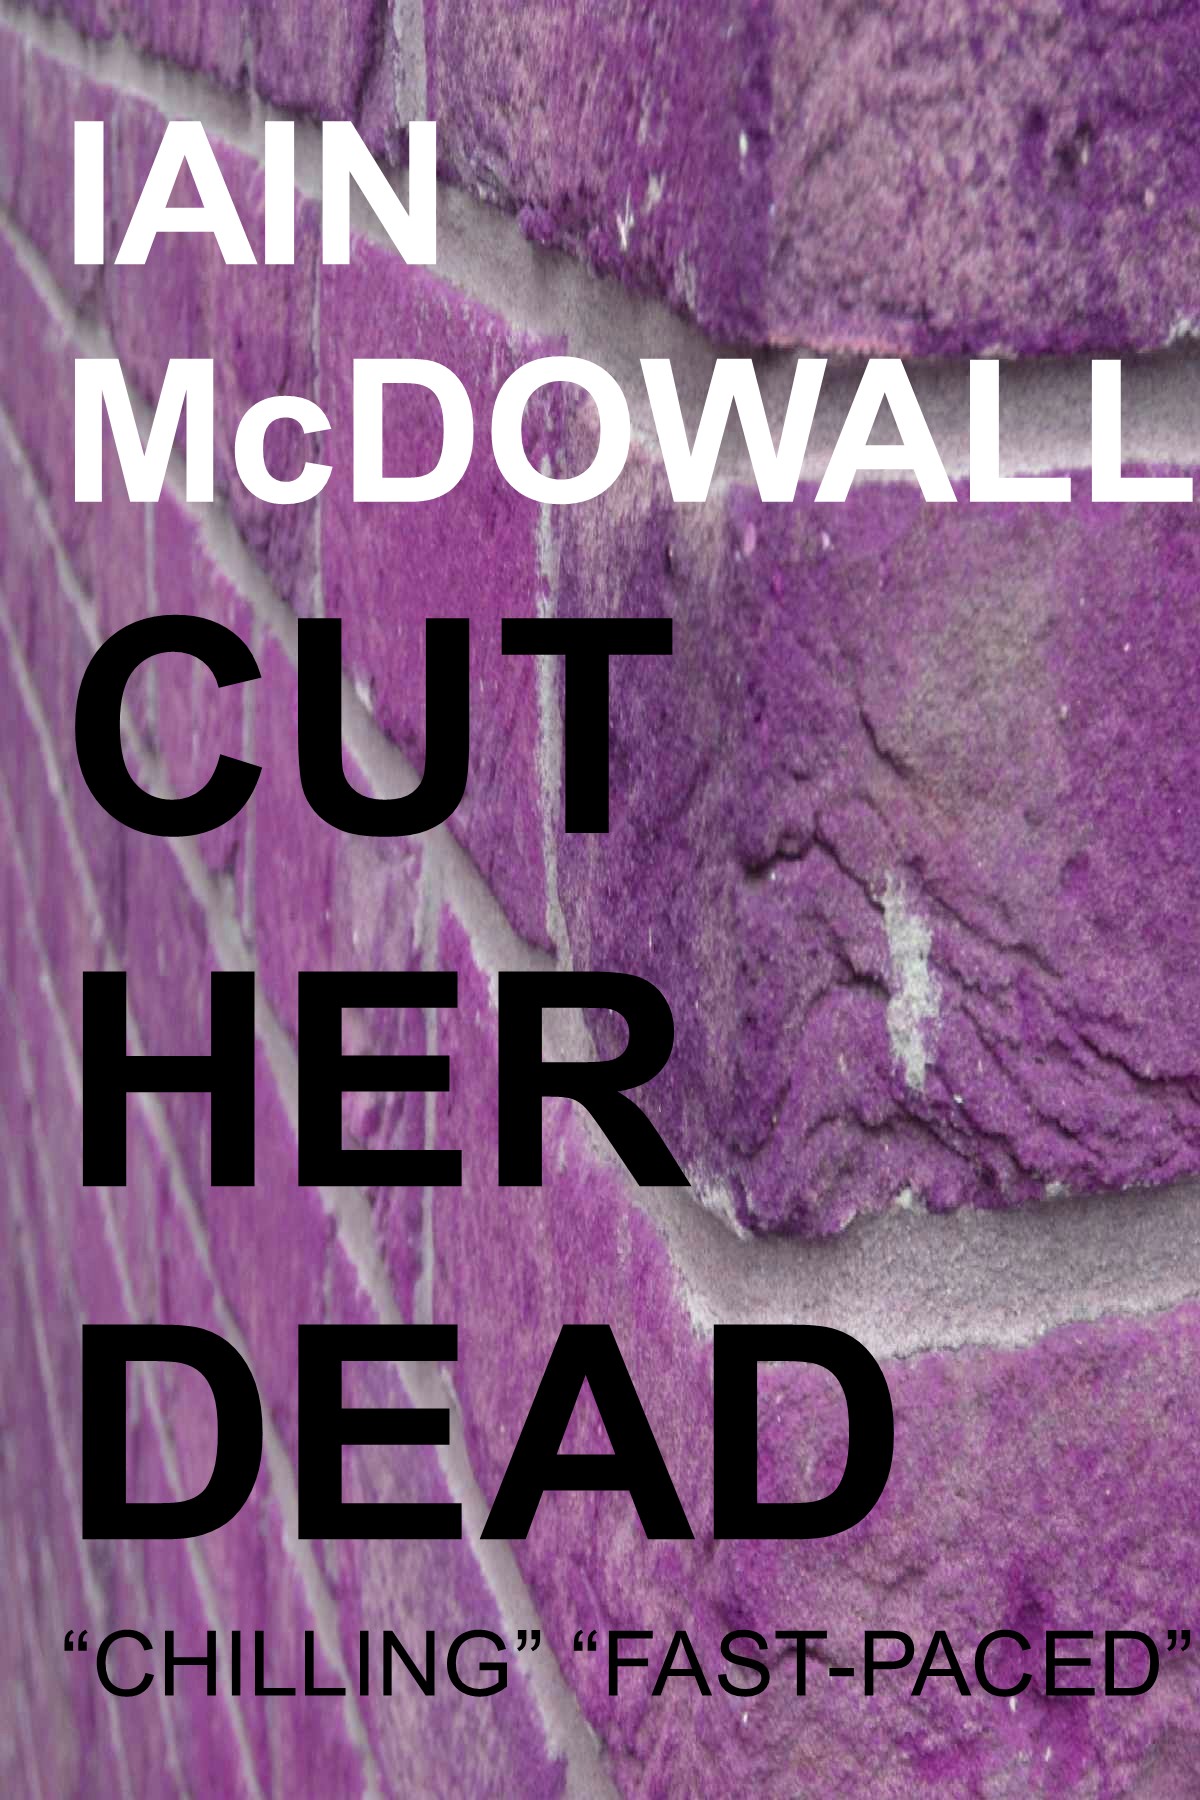 Cut Her Dead: new e-book edition on sale now